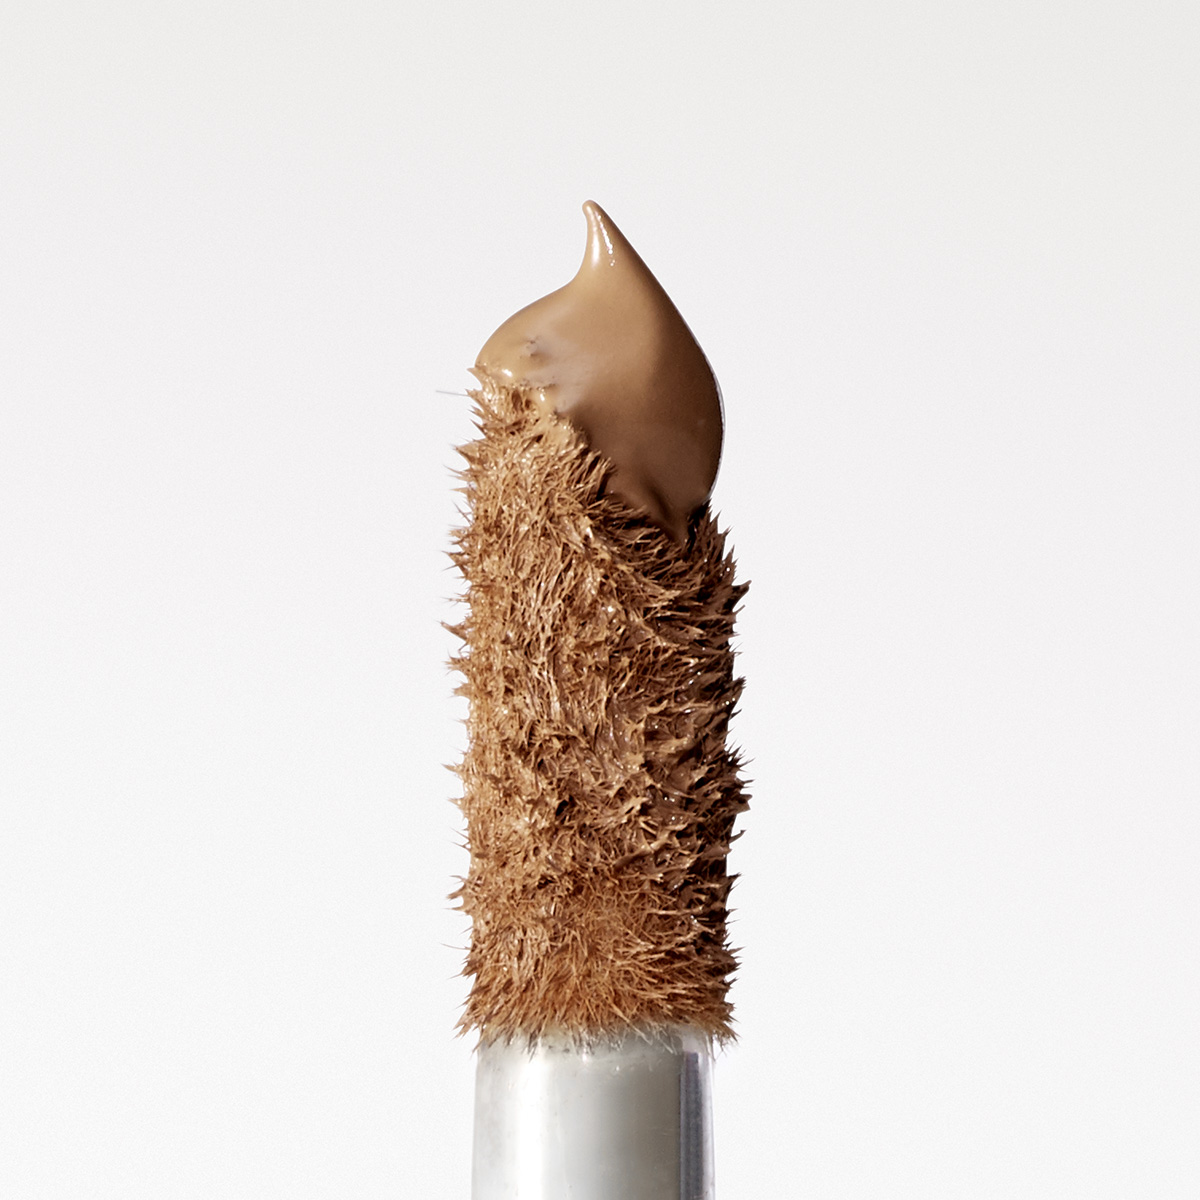 Zoomed in image of the applicator for the Rose Inc Softlight Concealer with light-medium concealer shade on tip